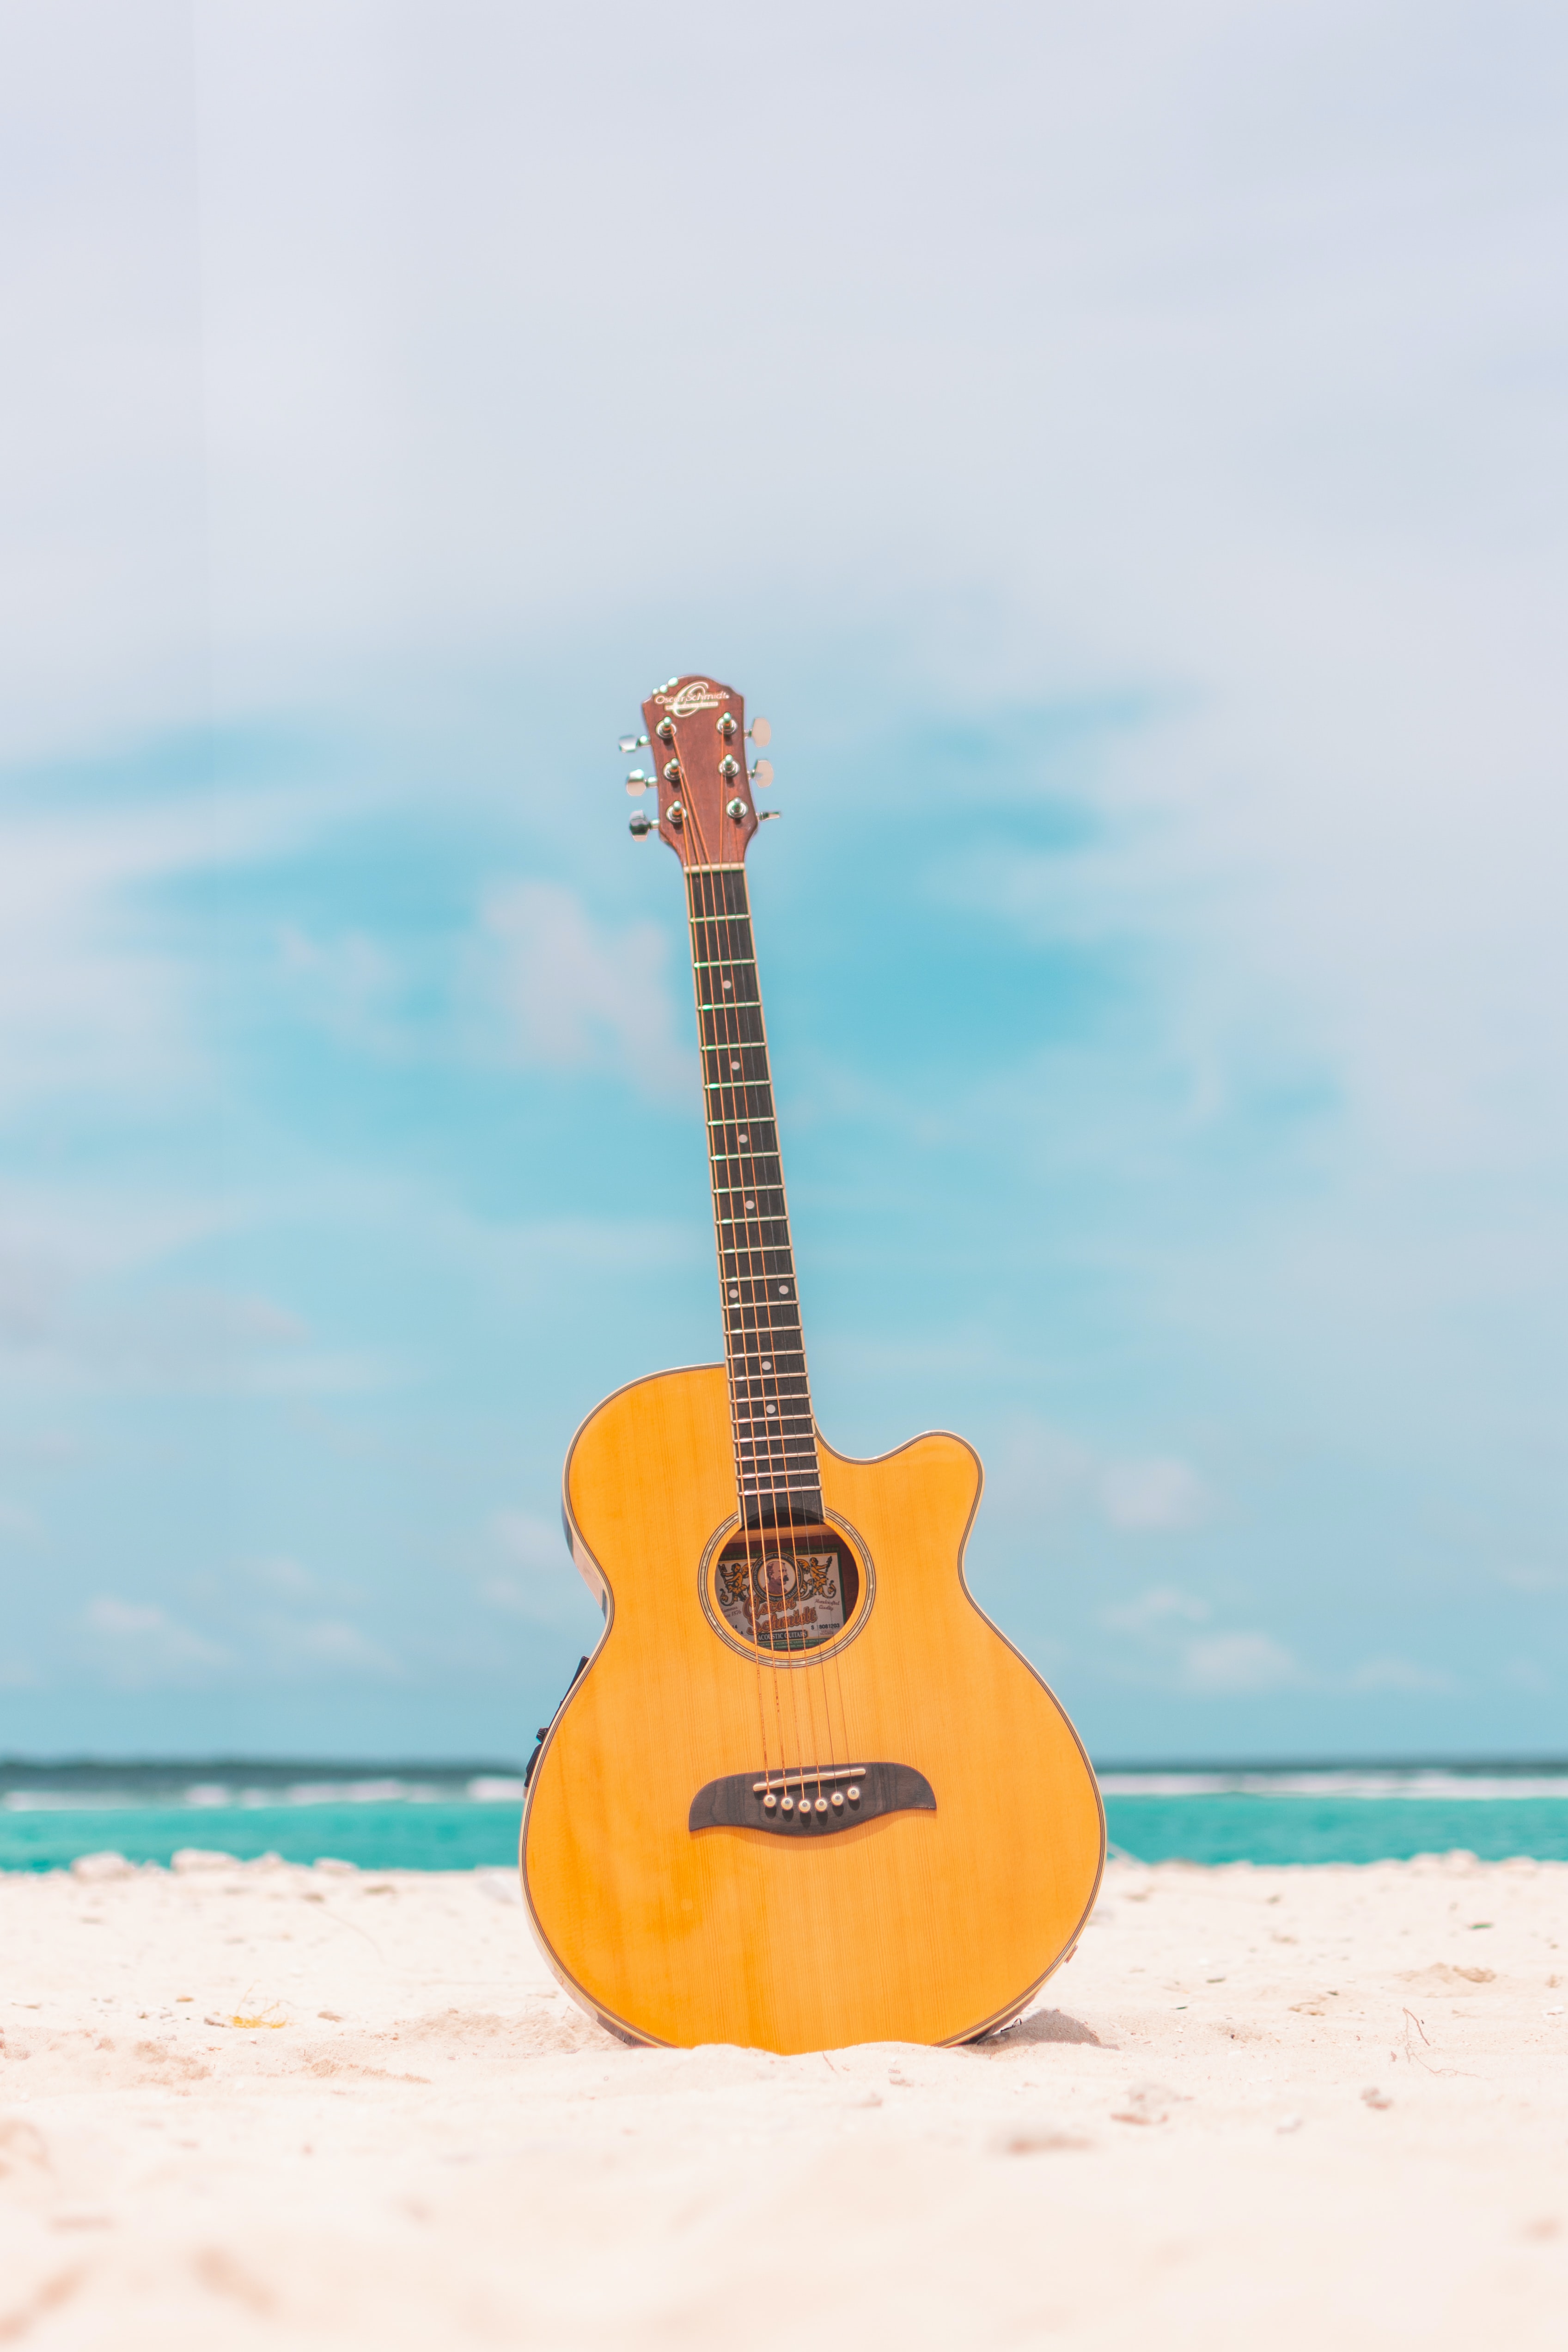 guitar, acoustic guitar, beach, music, summer, tool wallpapers for tablet